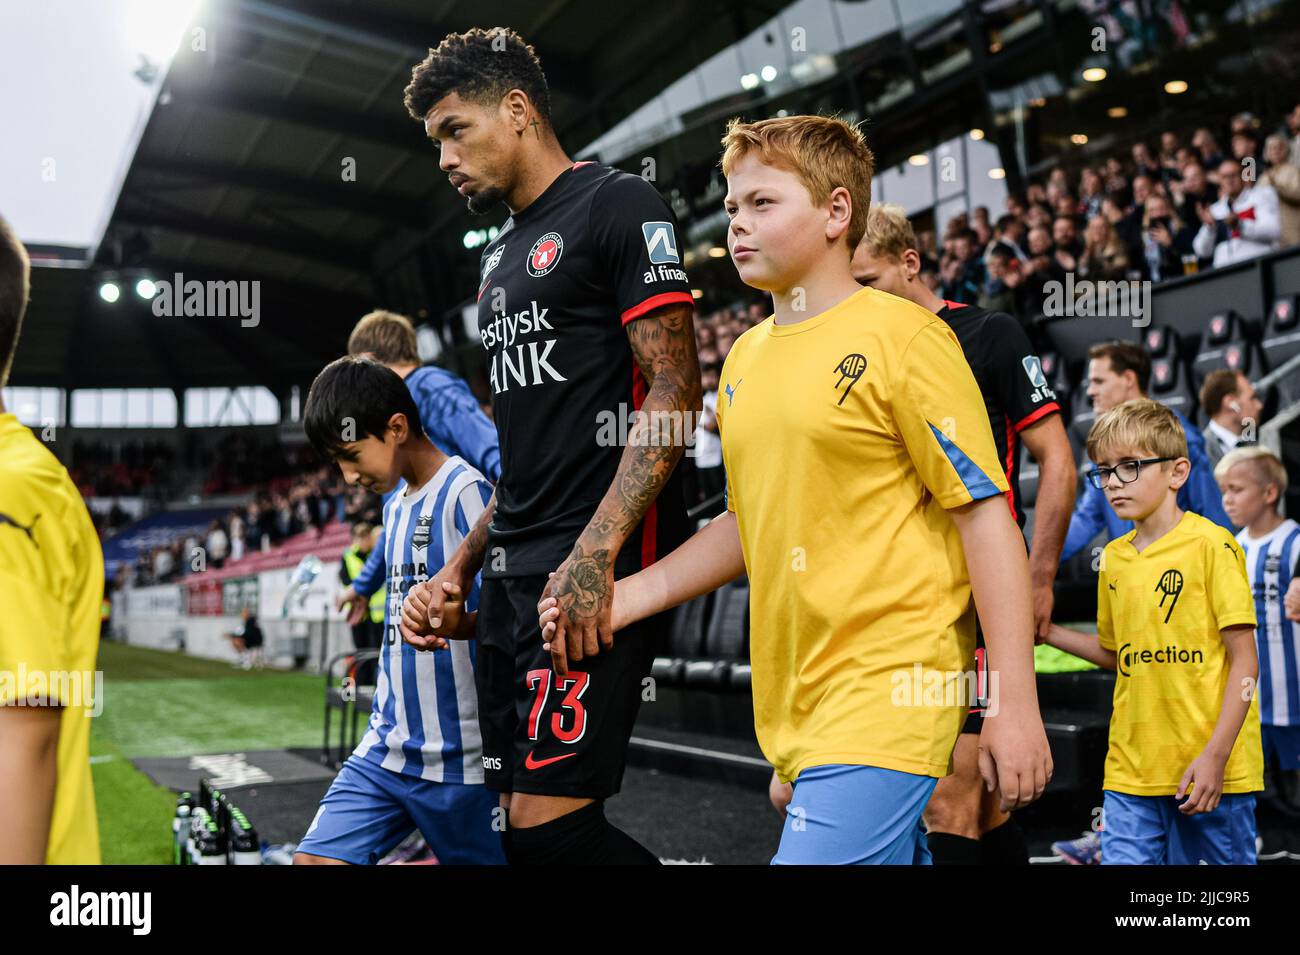 Herning, Denmark. 22nd, July 2022. Juninho (73) of FC Midtjylland seen during the 3F Superliga match between FC Midtjylland and Silkeborg IF at MCH Arena in Herning. (Photo credit: Gonzales Photo - Morten Kjaer). Stock Photo